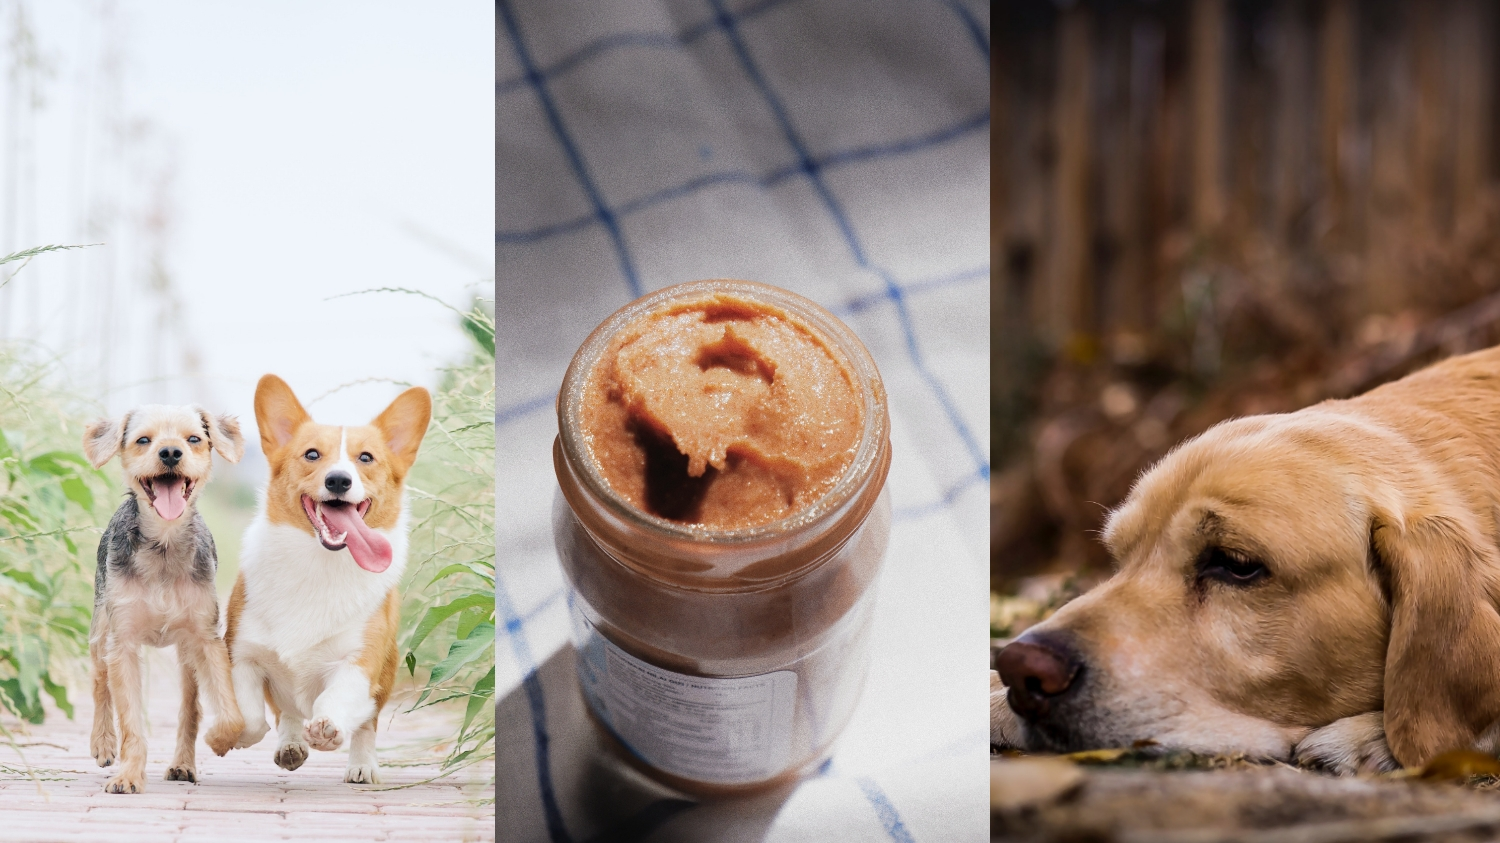 A mixture of images of dogs and peanut butter. The image shows the effects of peanut butter on dogs.